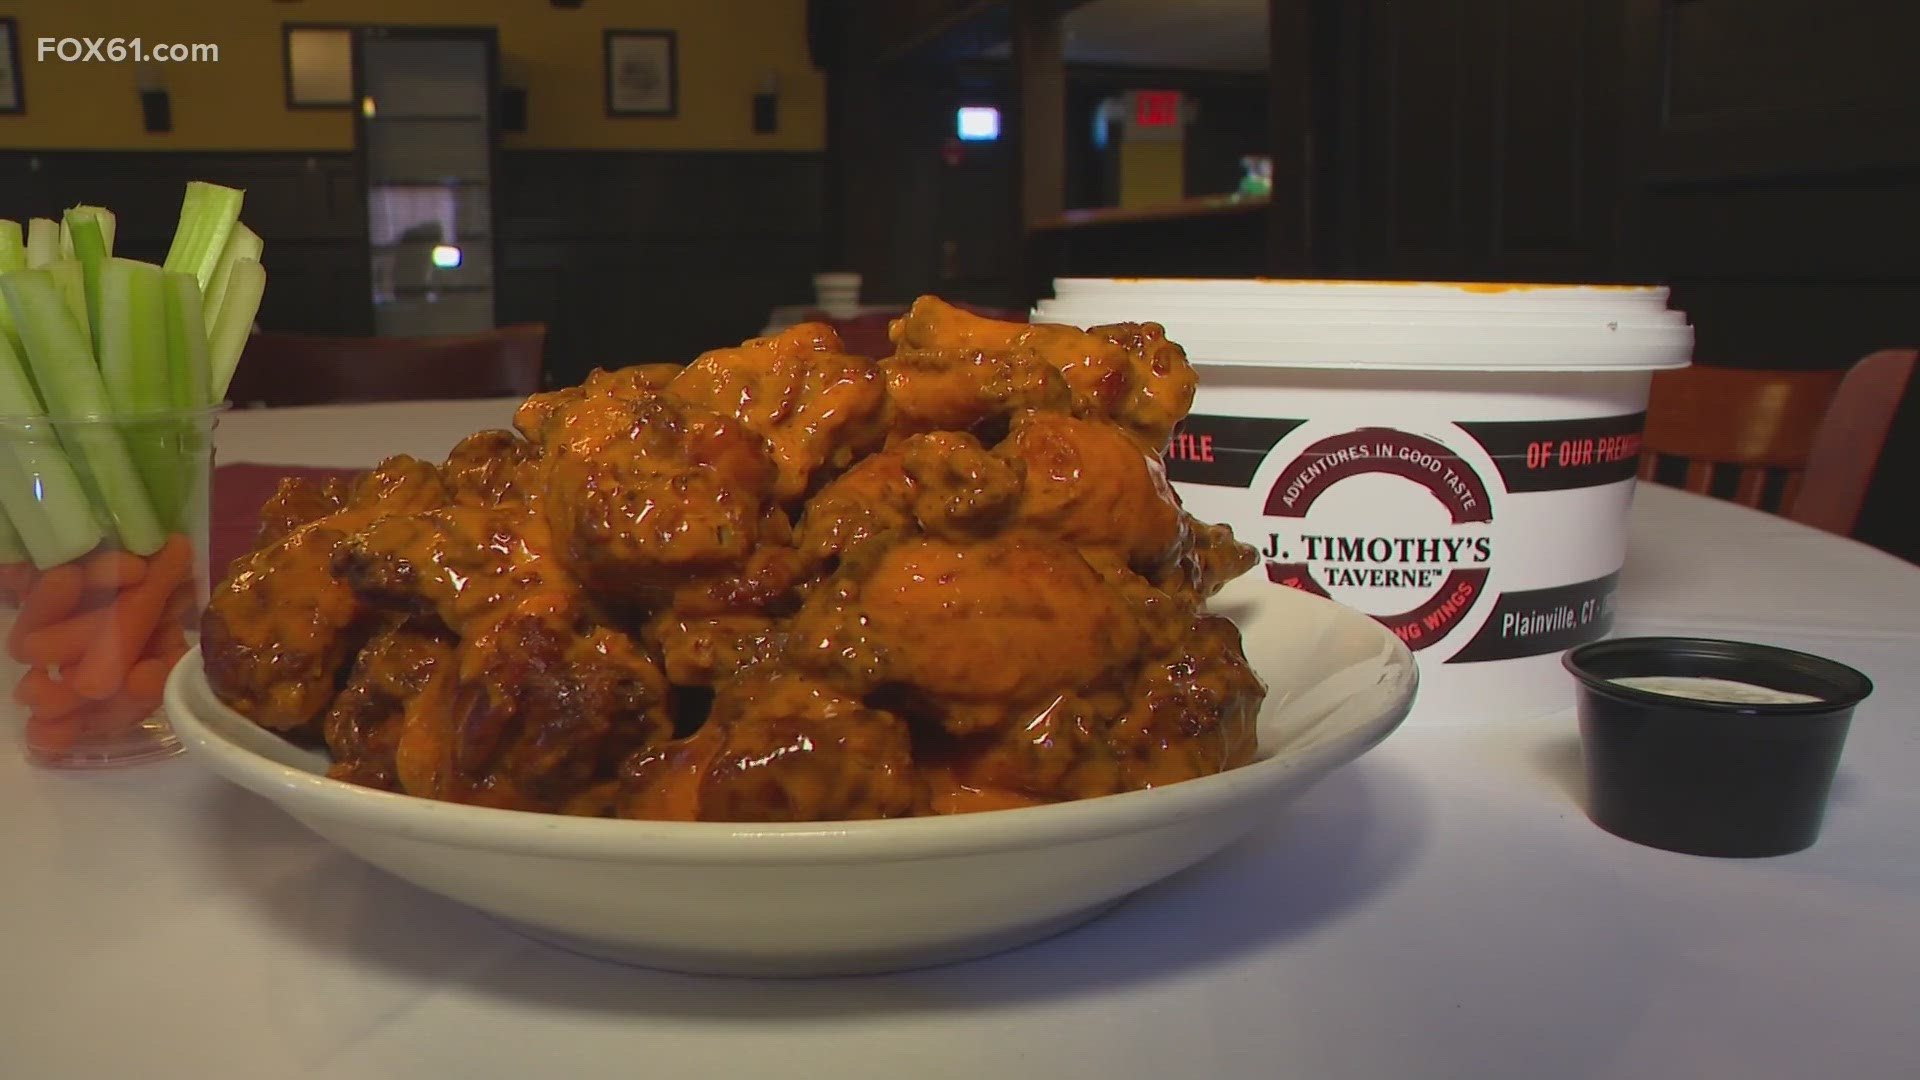 Super Bowl week is truly their Super Bowl at J. Timothys’ Taverne and 2024 is no exception. This time of year, it’s about J. Timothy’s highly rated chicken wings.